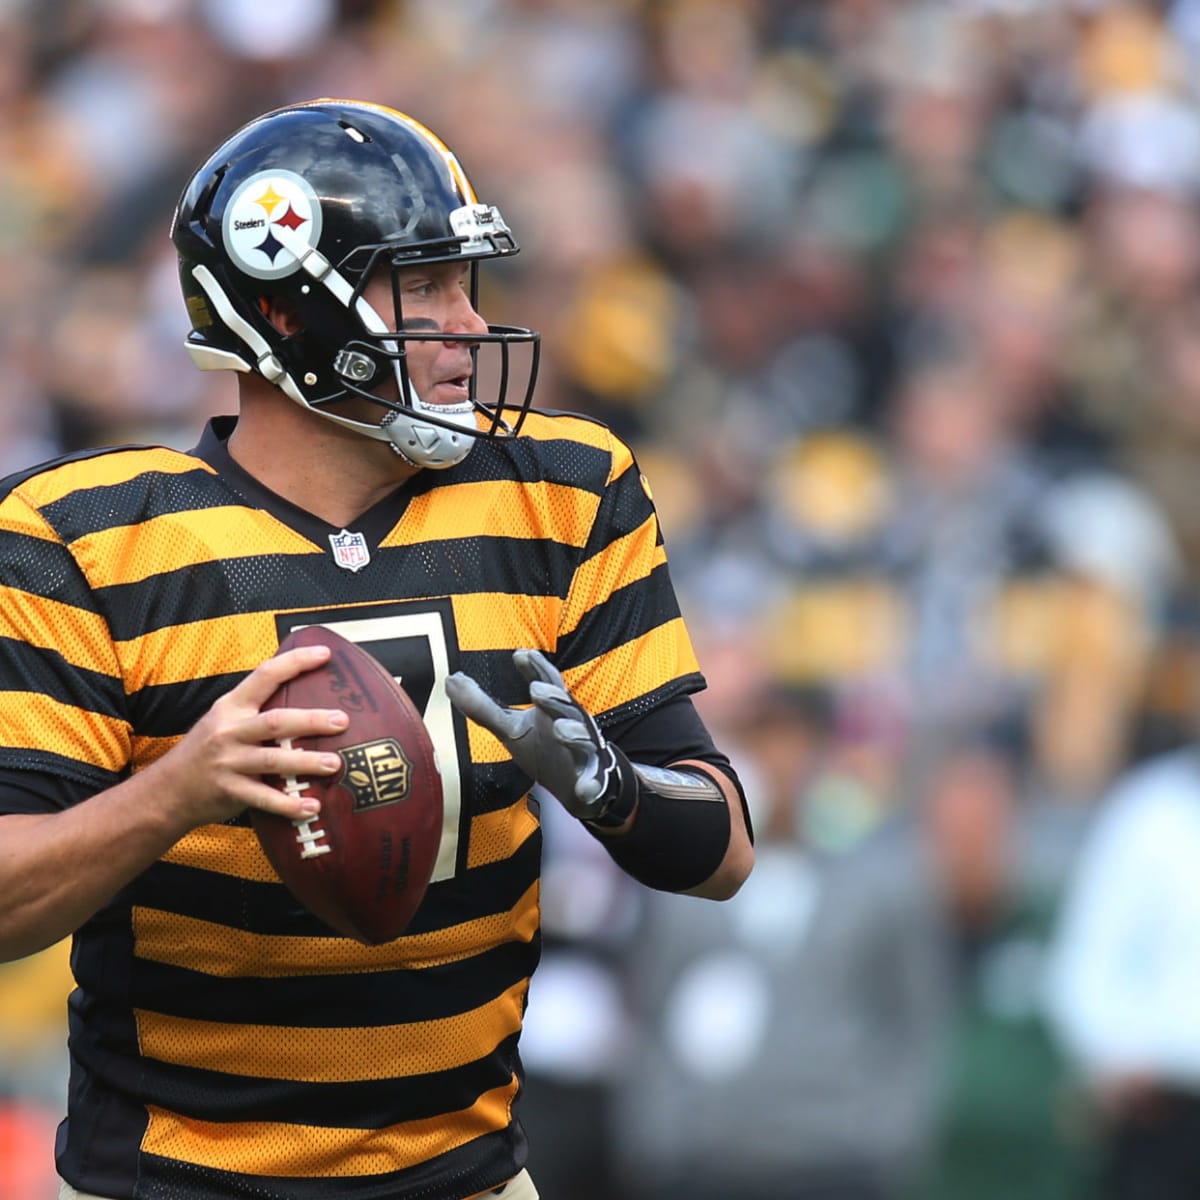 pittsburgh steelers color rush uniforms